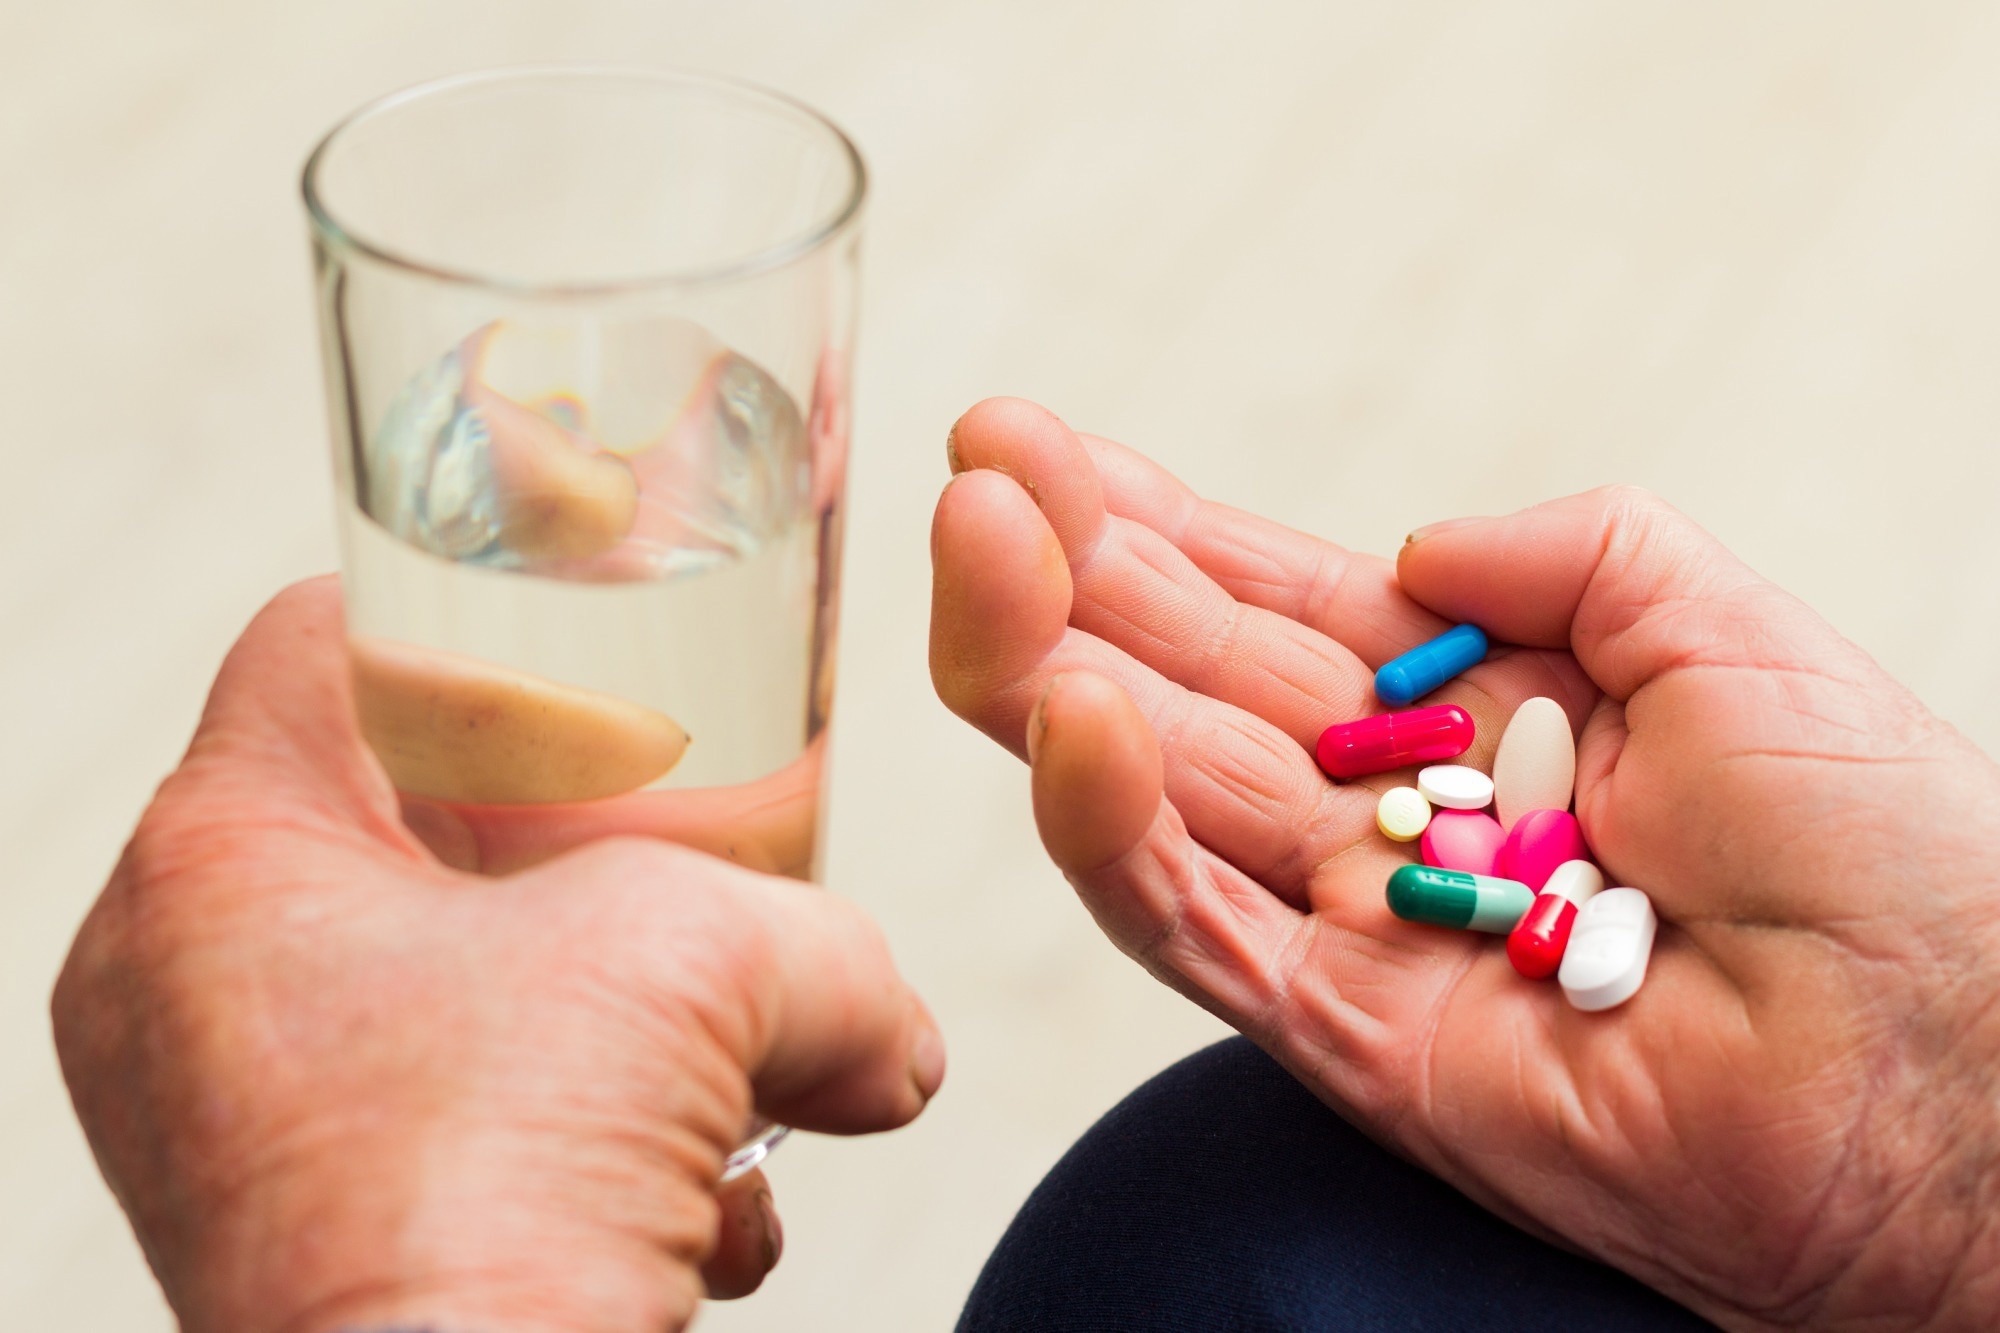 Study: Comparative efficacy and safety of adjunctive drugs to levodopa for fluctuating Parkinson’s disease - network meta-analysis. Image Credit: Barabasa/Shutterstock.com